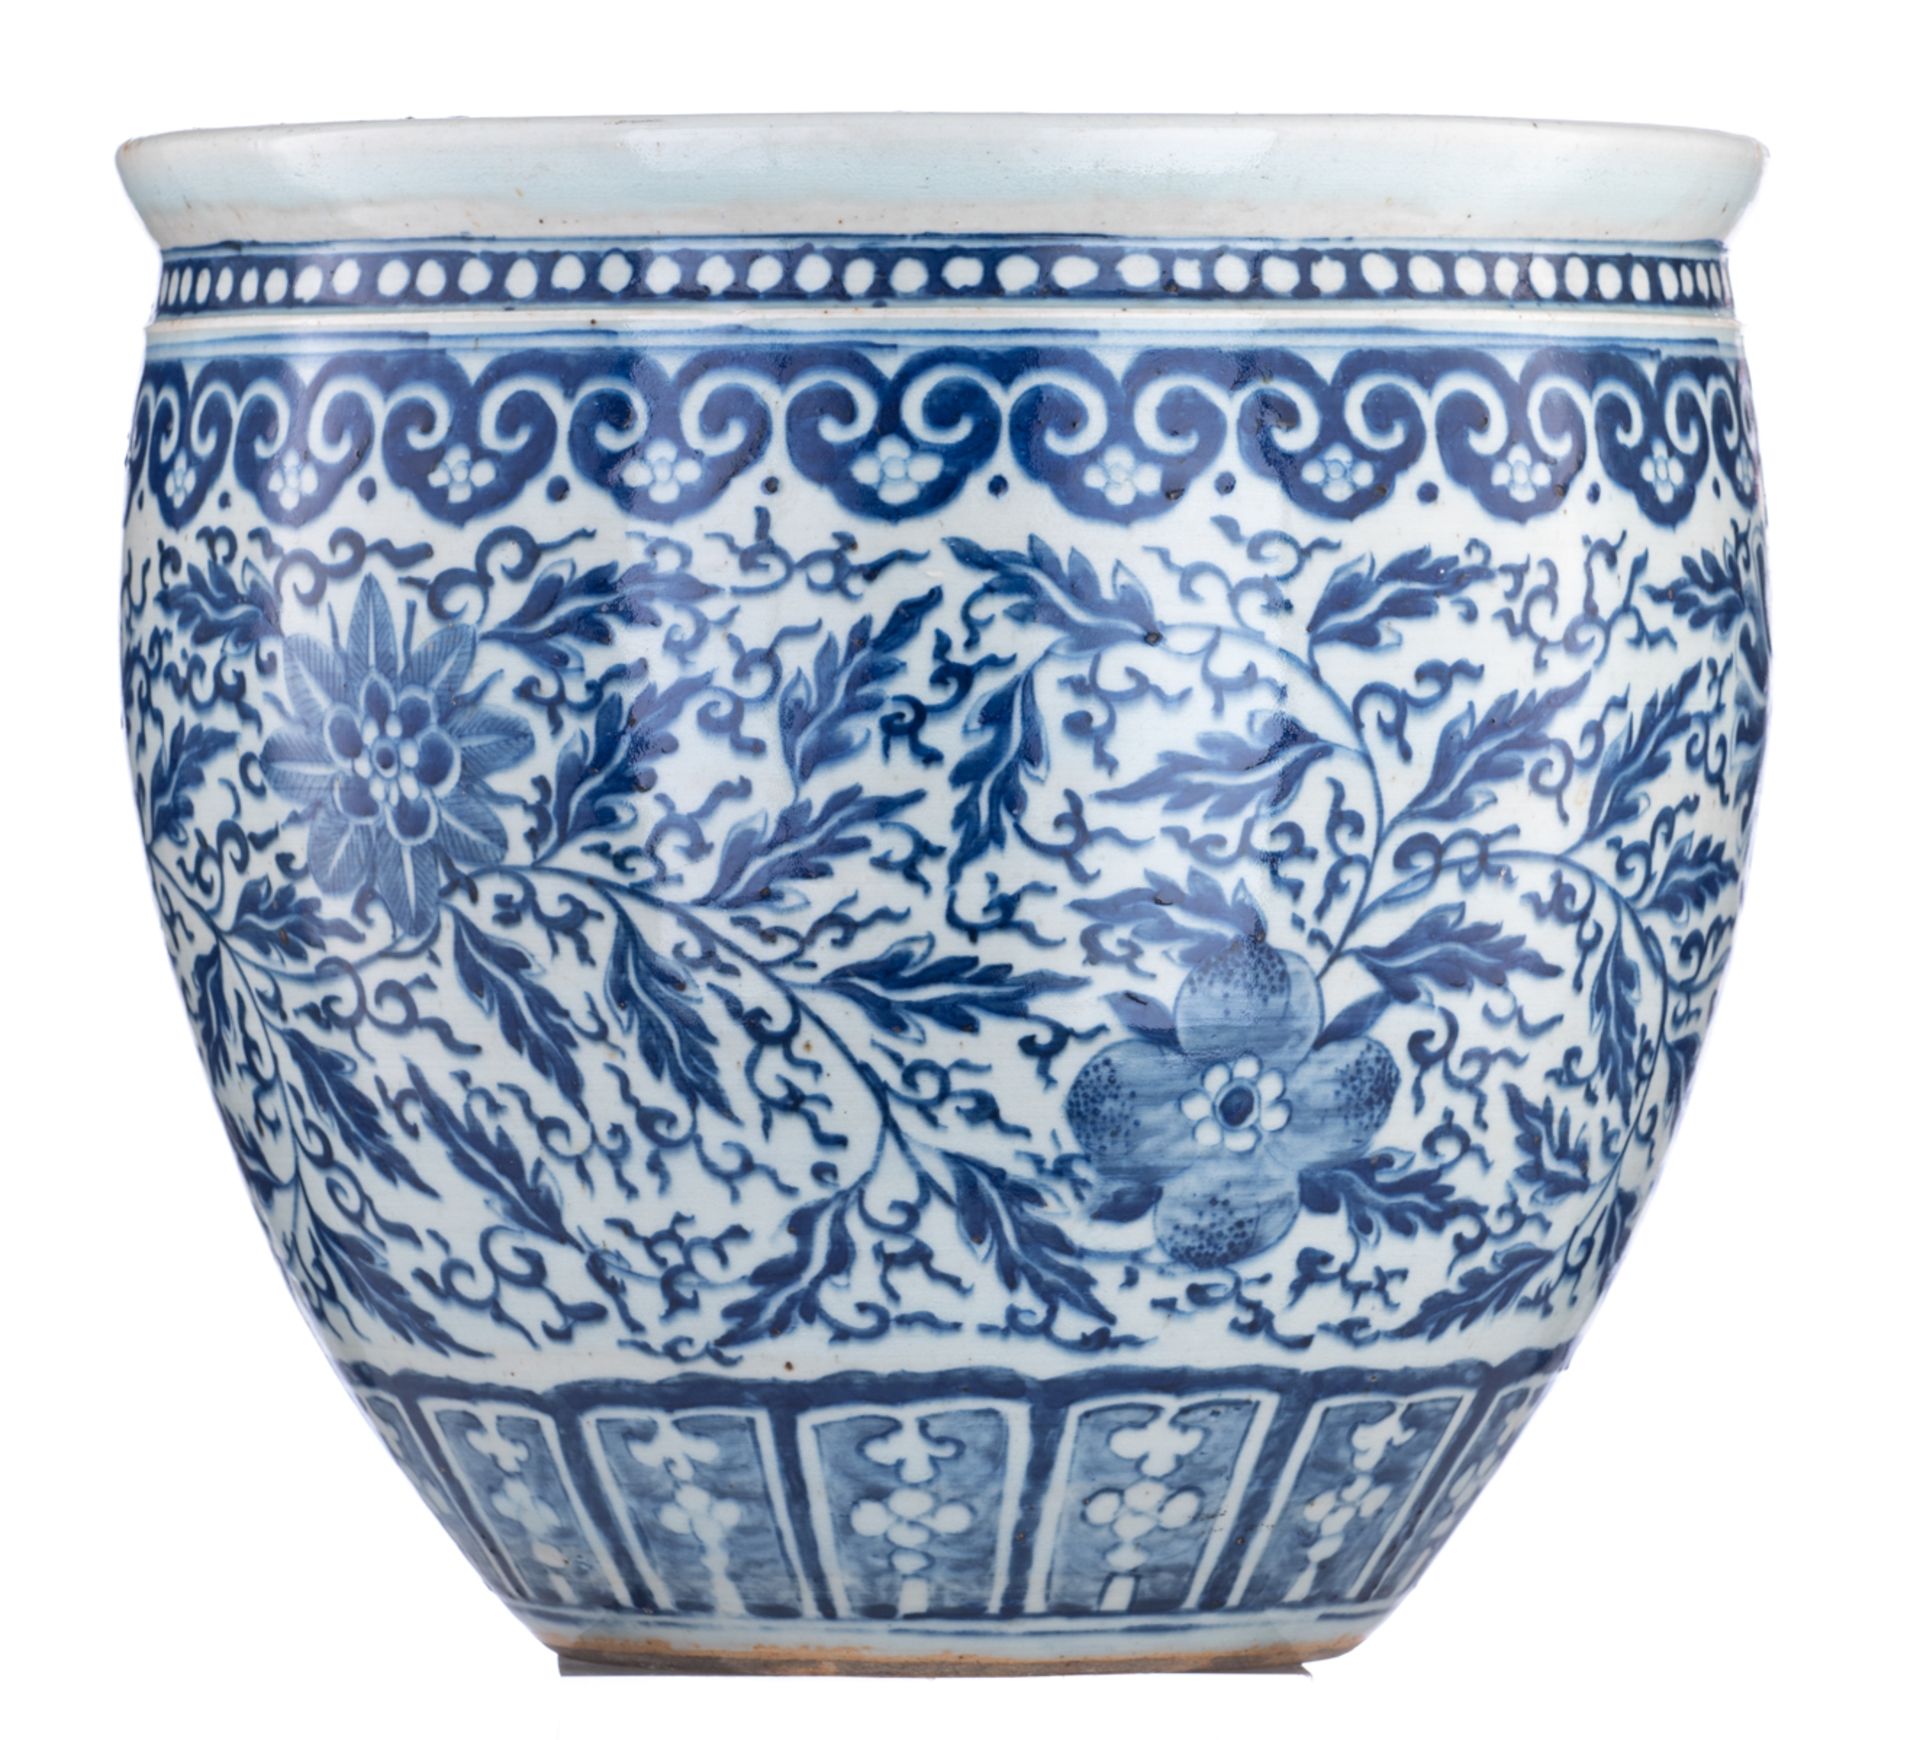 A Chinese blue and white cachepot, decorated with flower scrolls and leafy tendrils, 19thC, H 33 - ø - Bild 5 aus 7